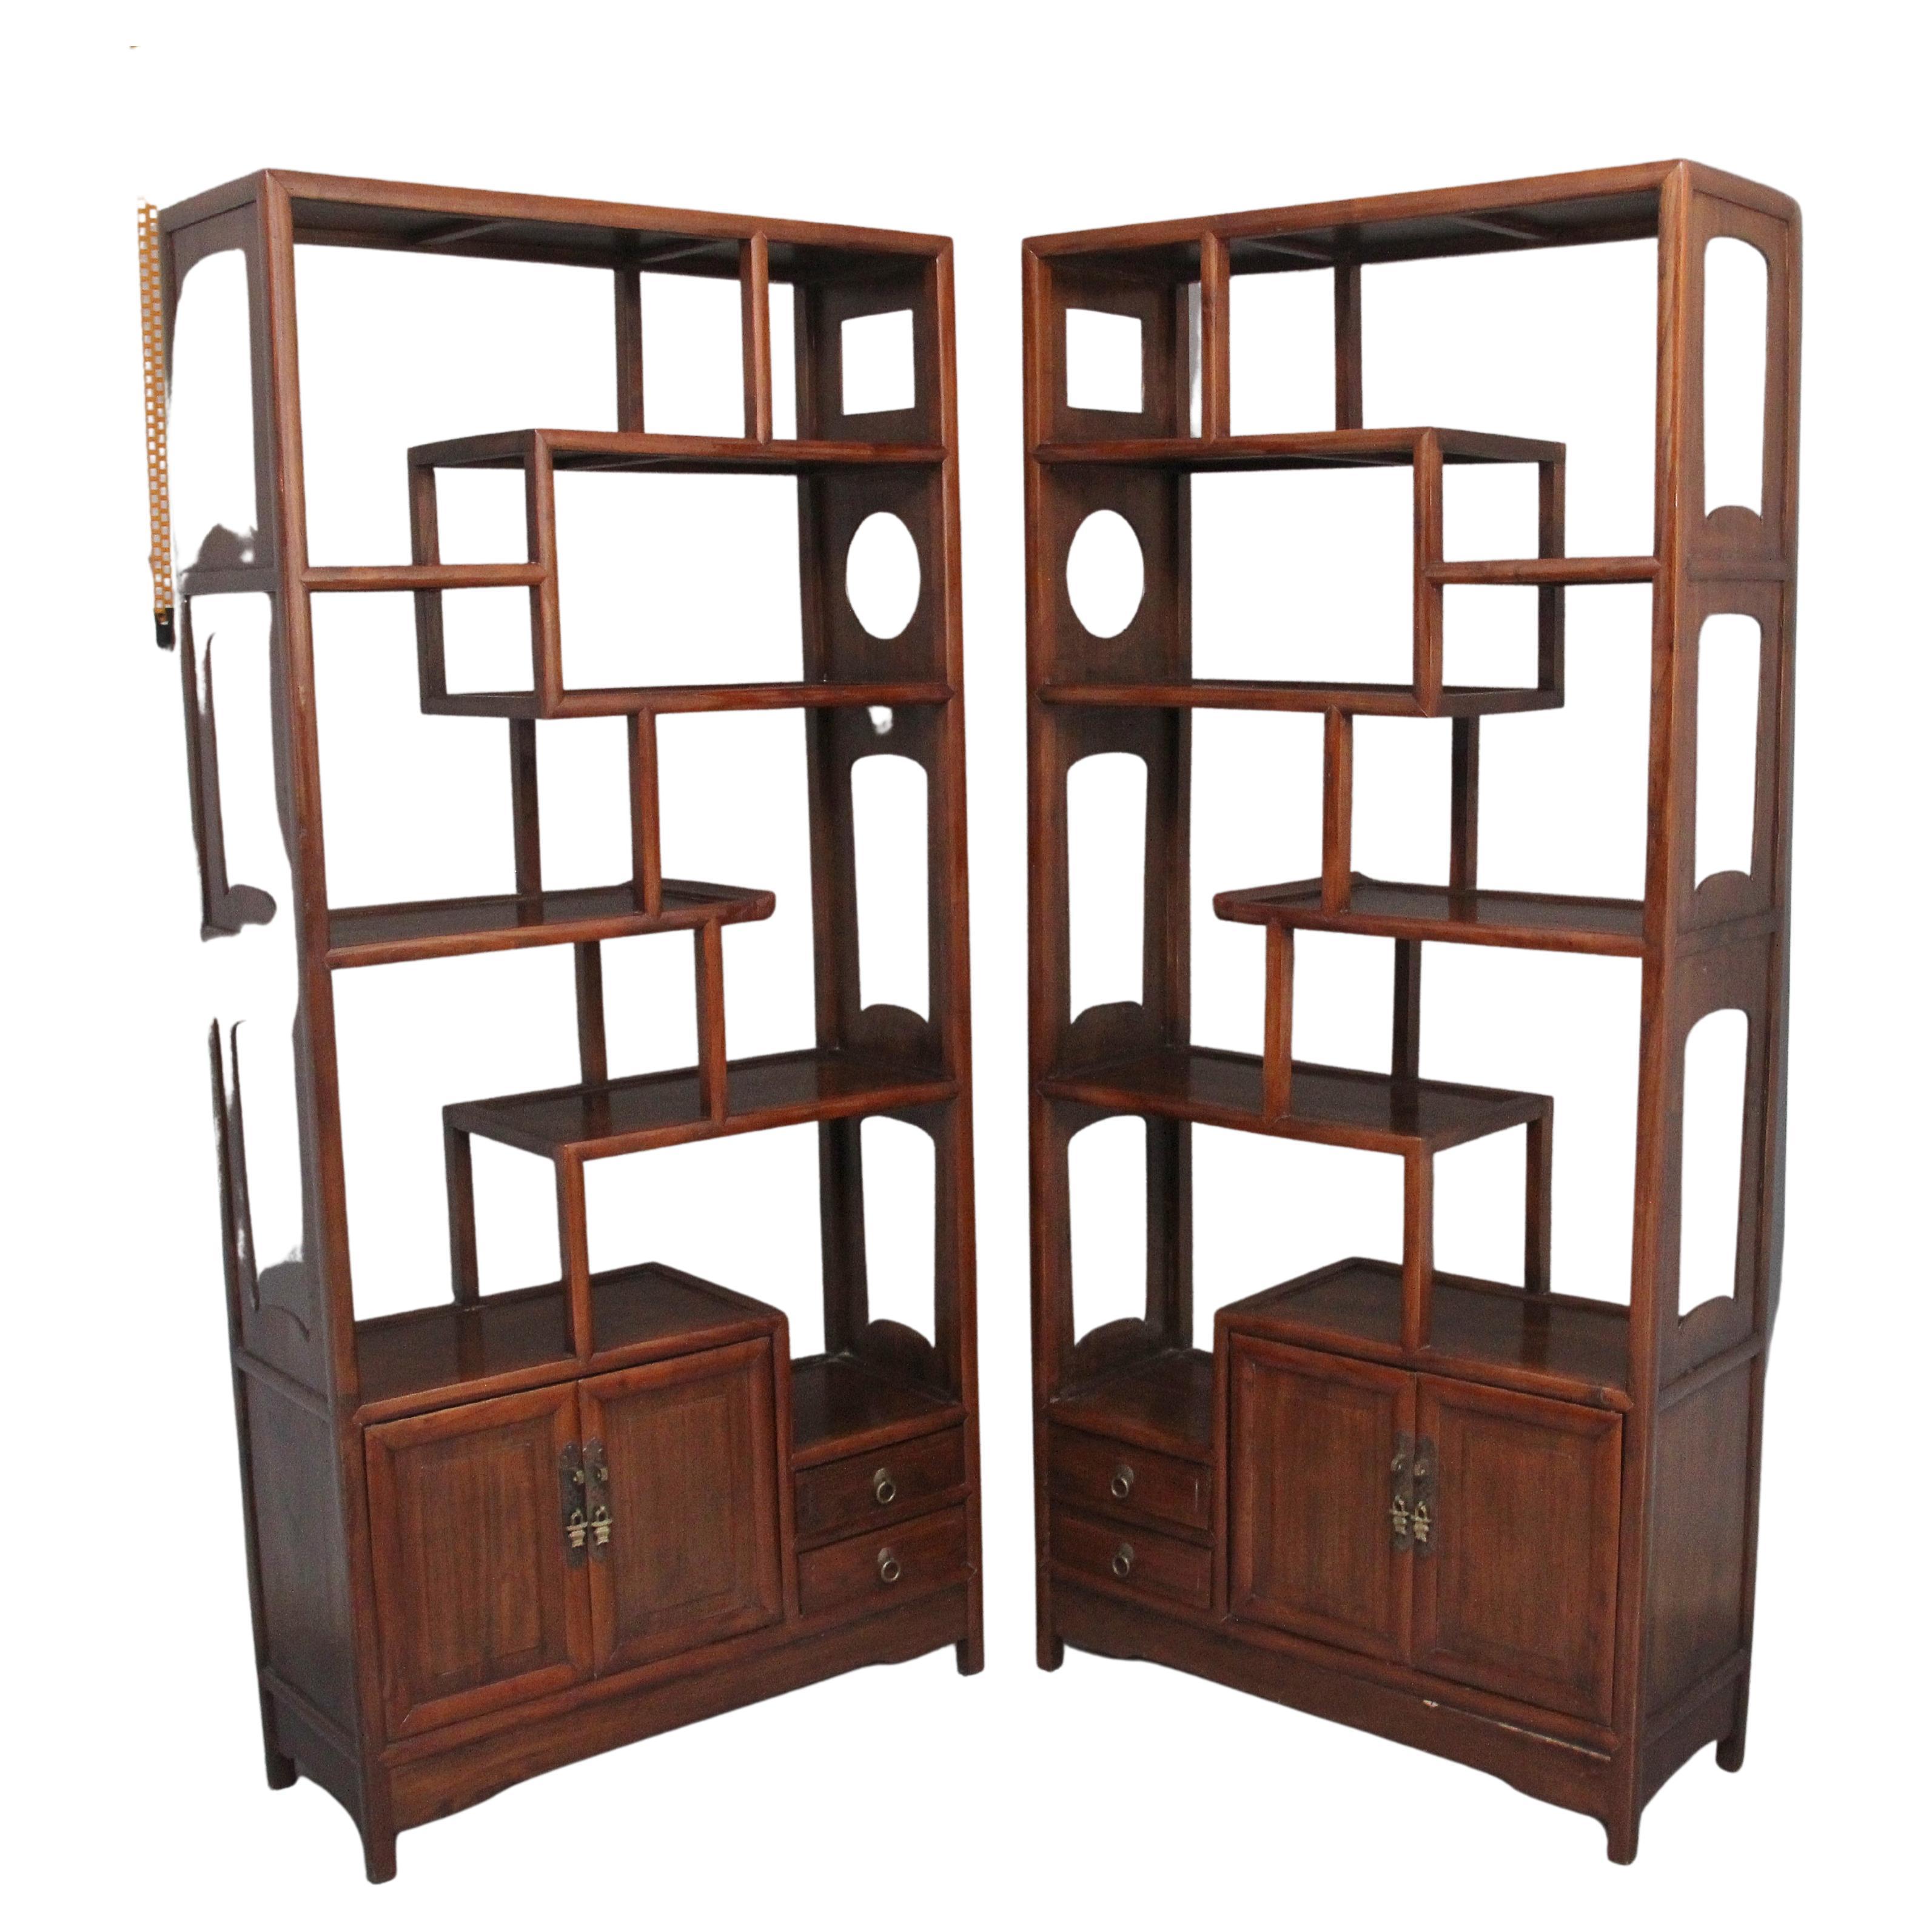 Pair of Early 20th Century Chinese Display Cabinets